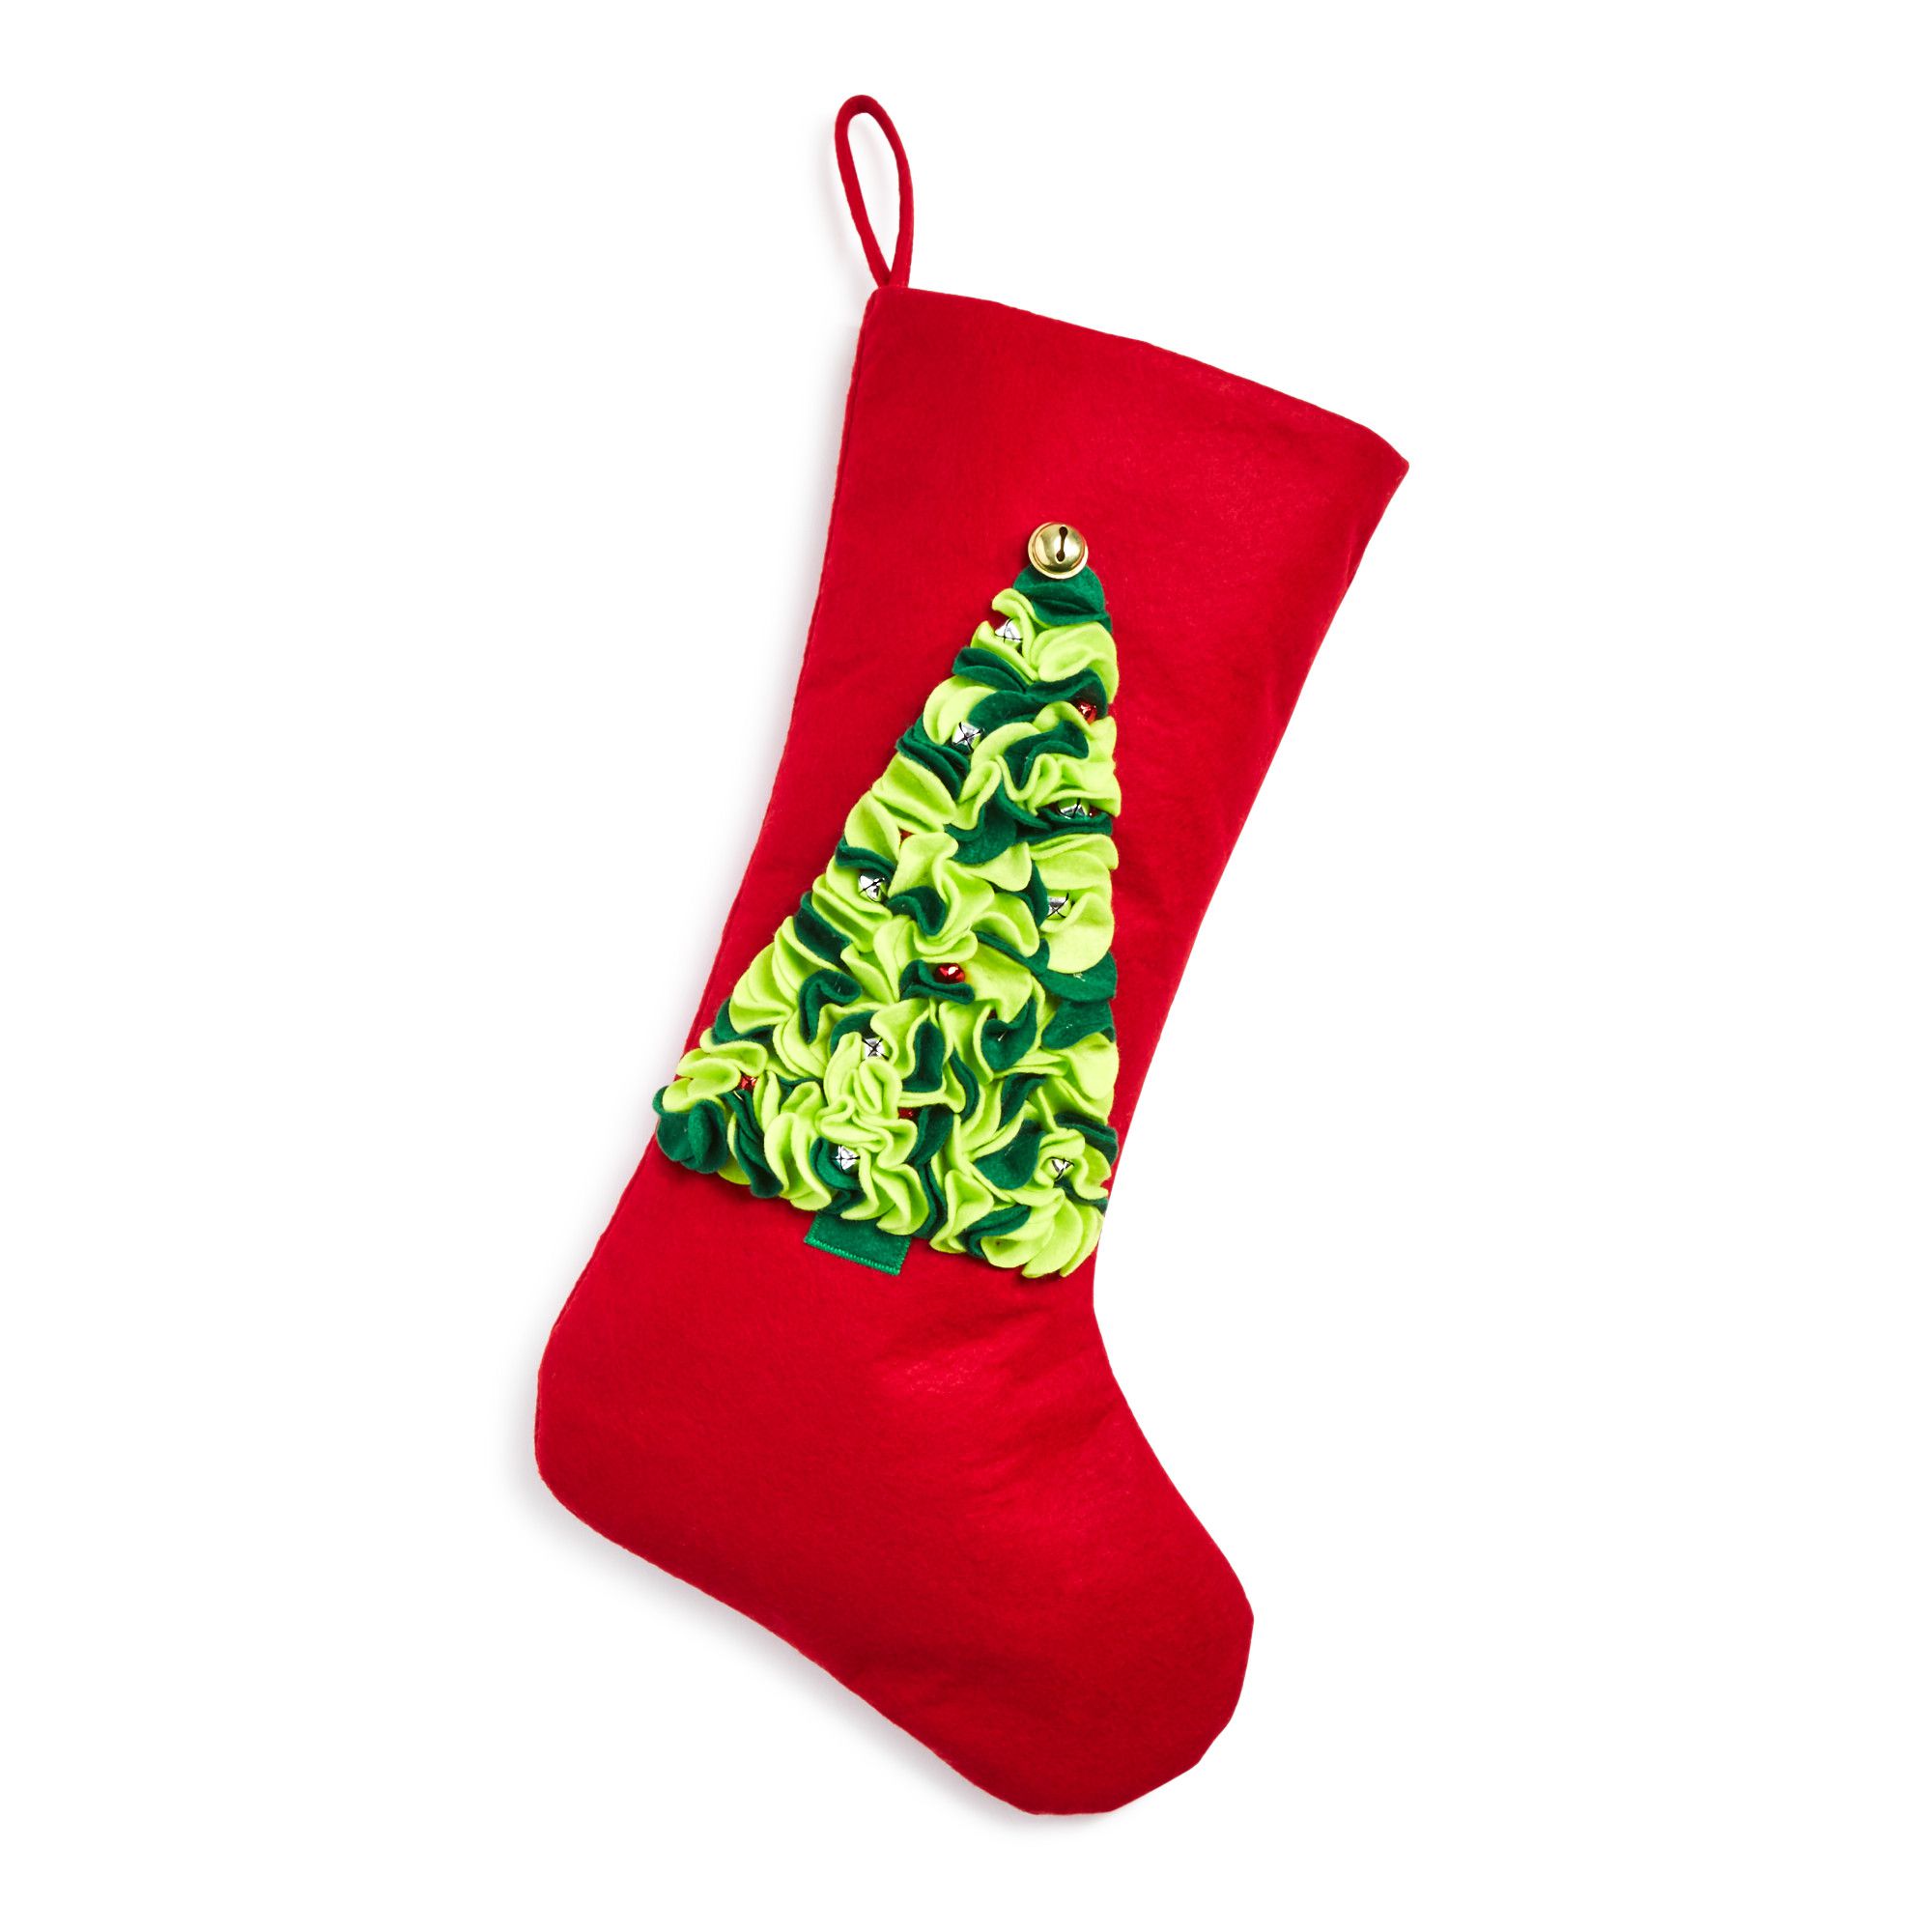 Best Christmas Stockings - Knit And Personalized Christmas Stocking ...